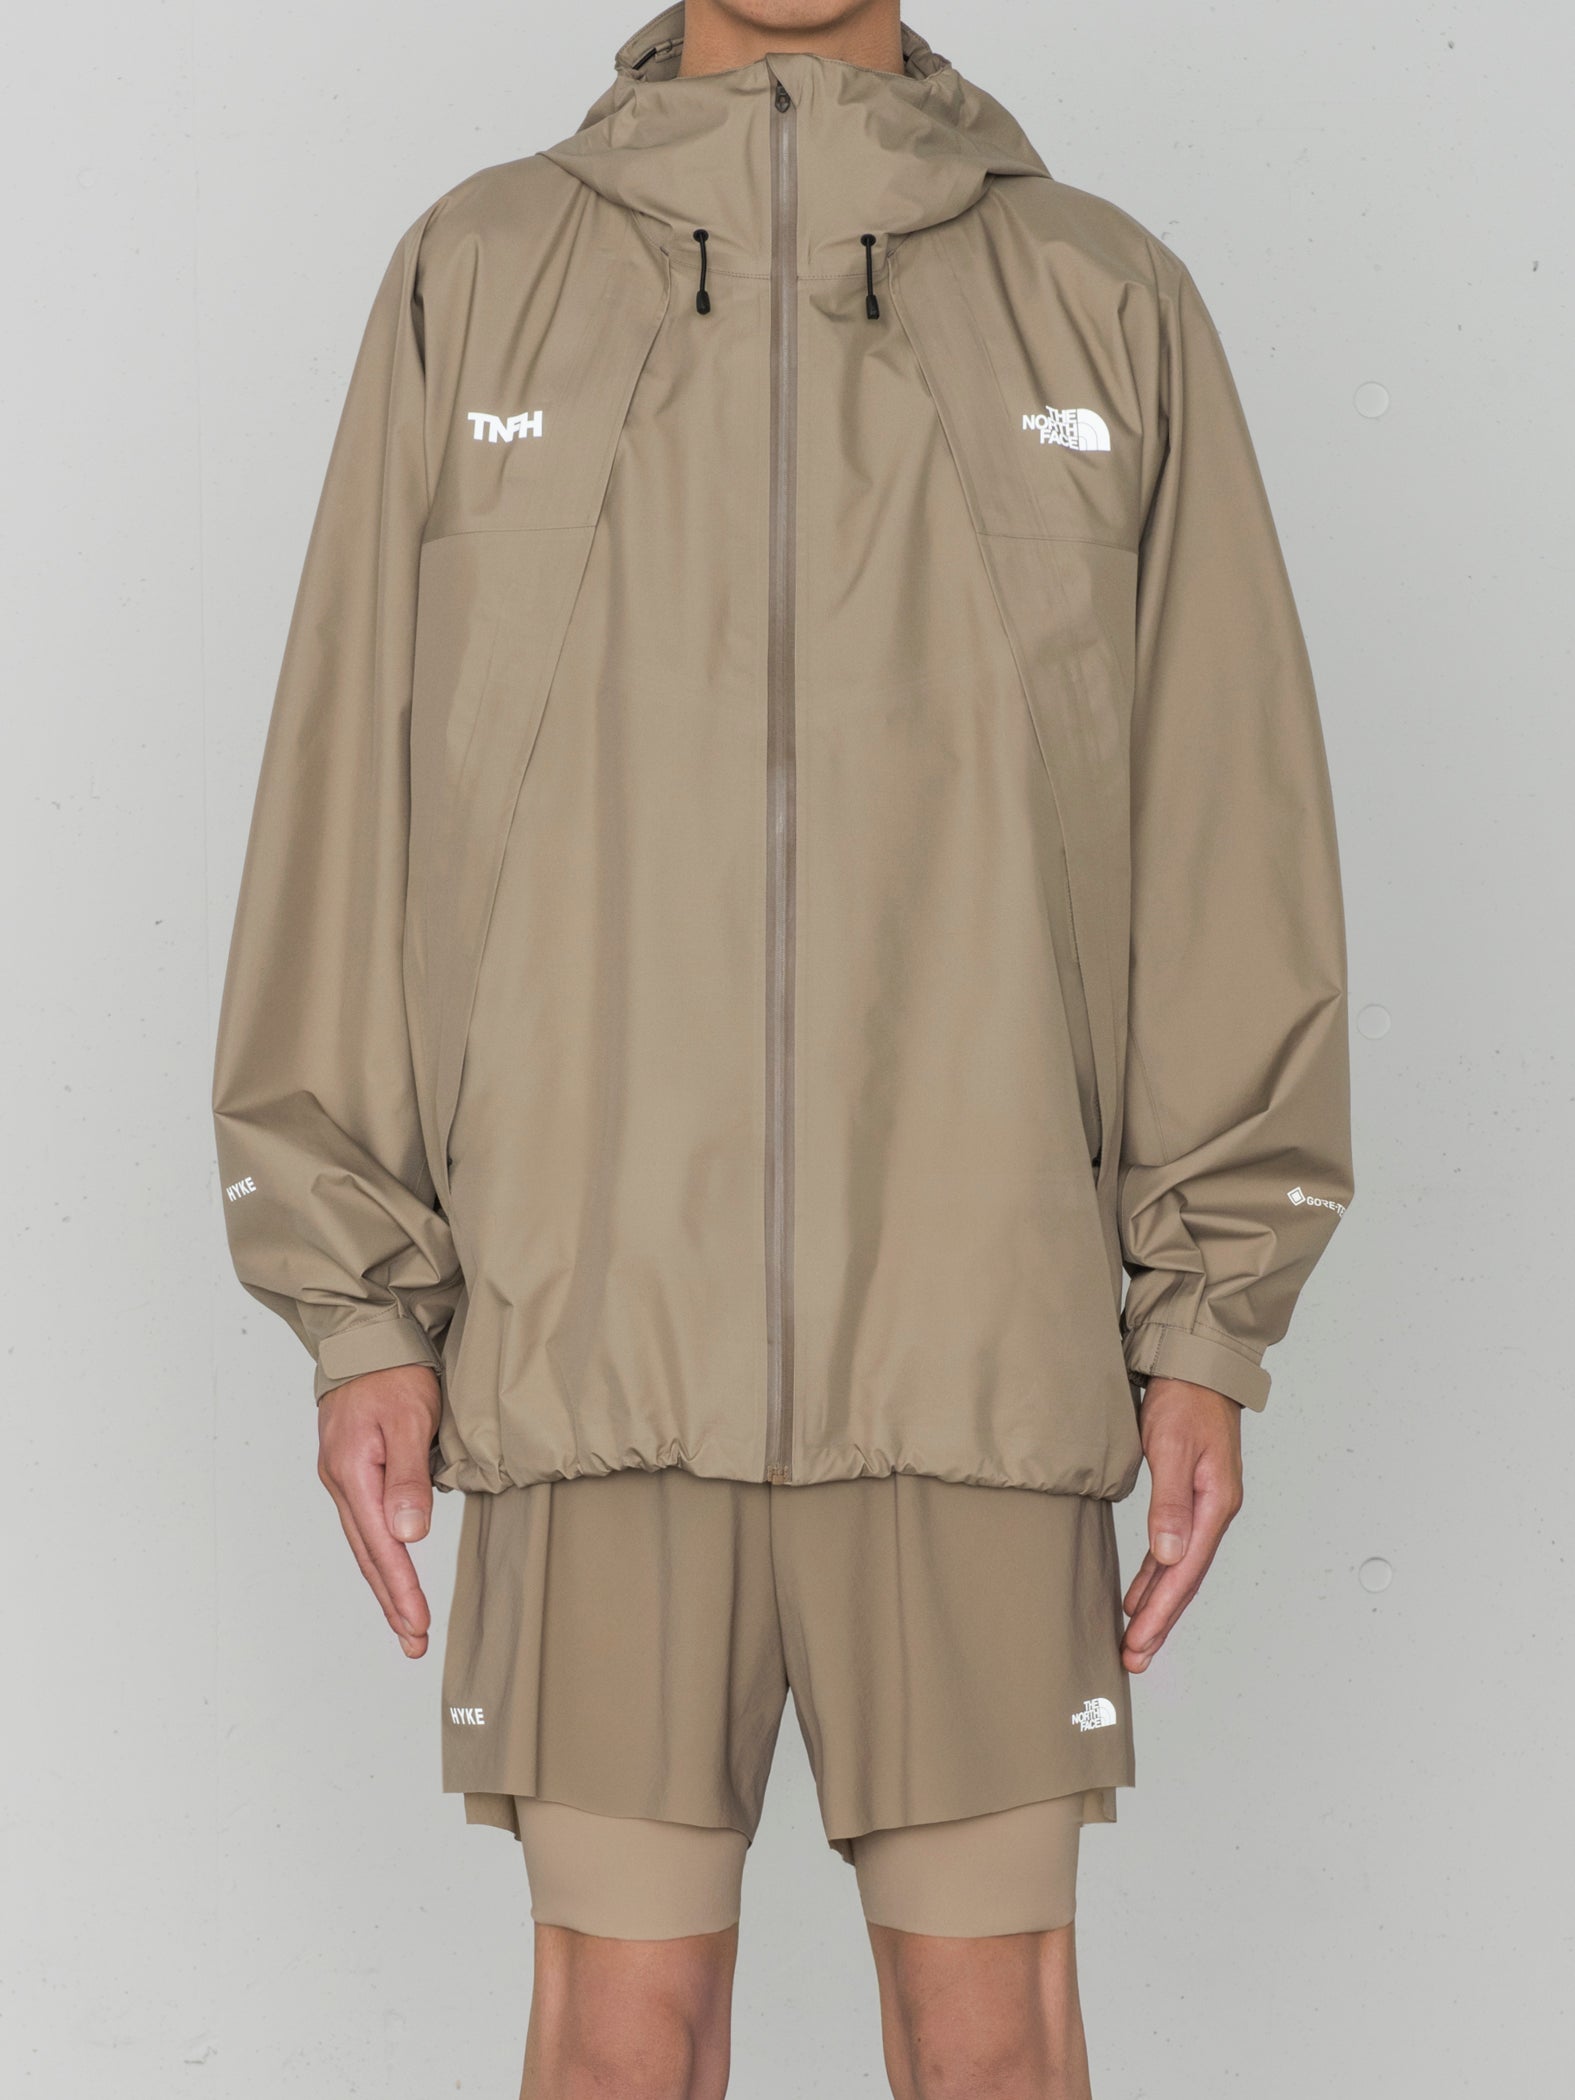 GTX Trail Jacket (Mens)TNFH THE NORTH FACE × HYKE – HYKE ONLINE STORE